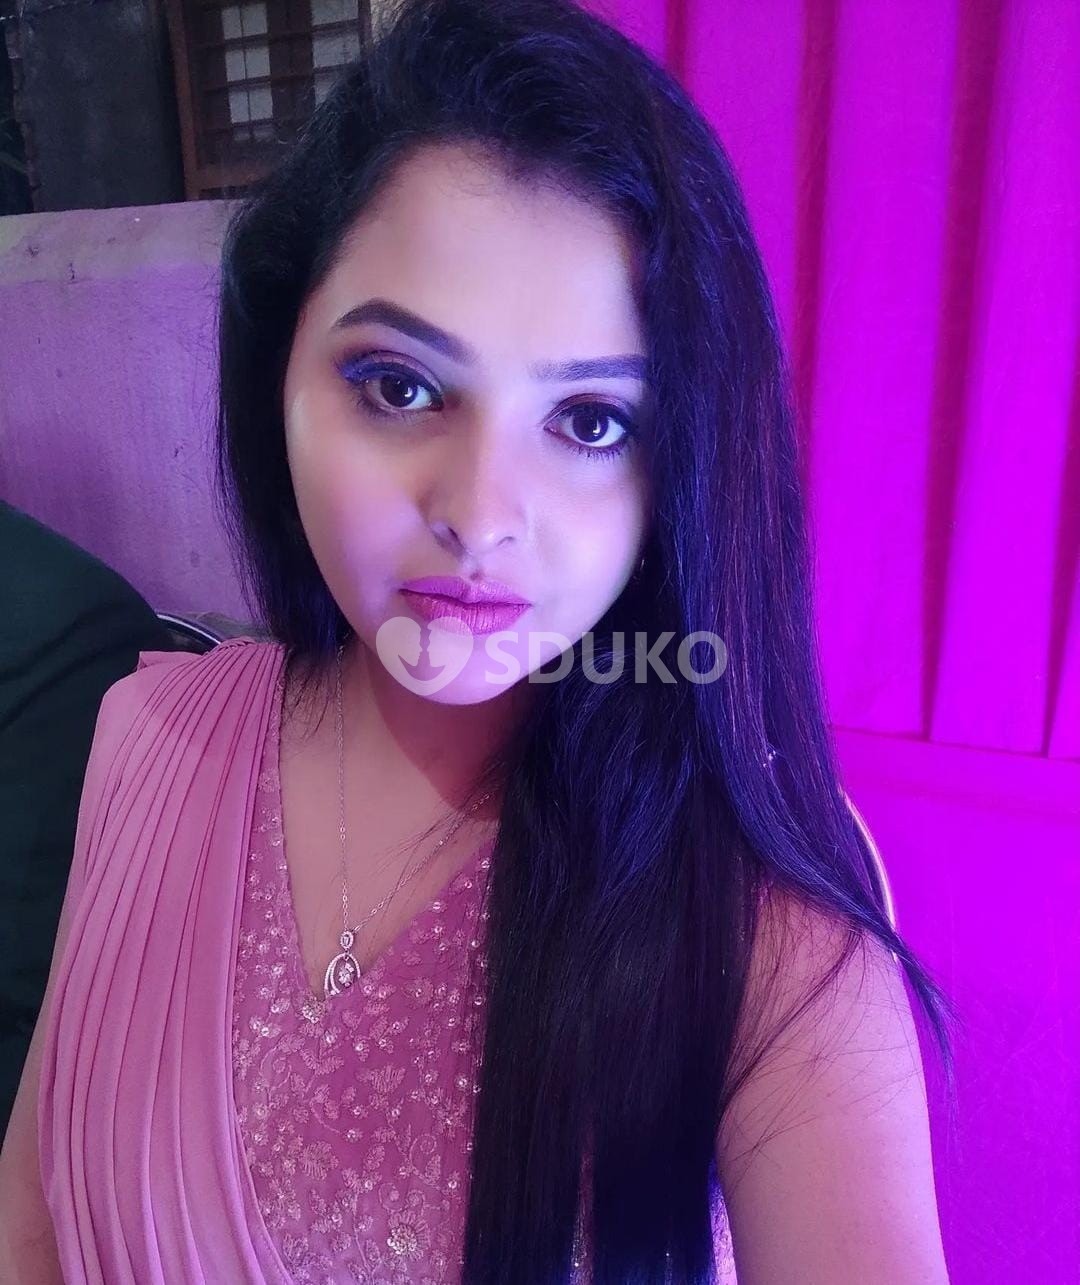 Hello Guys I am Kurla Mohini low cost unlimited hard sex call girls Housewife service